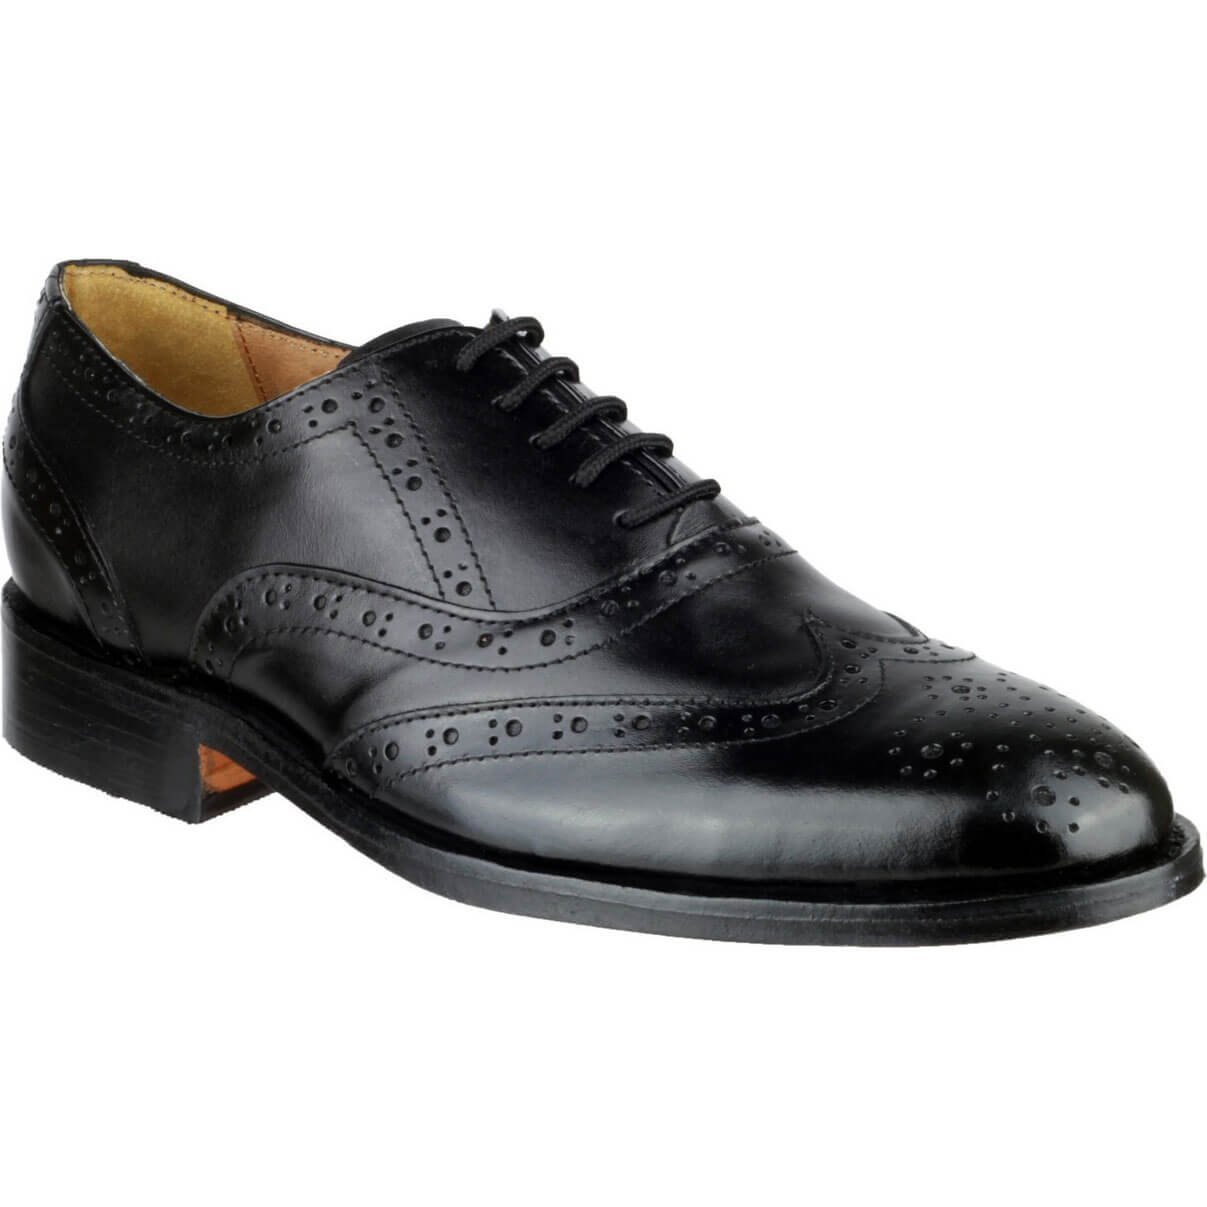 Image of Amblers Ben Leather Soled Oxford Brogue Black Size 6